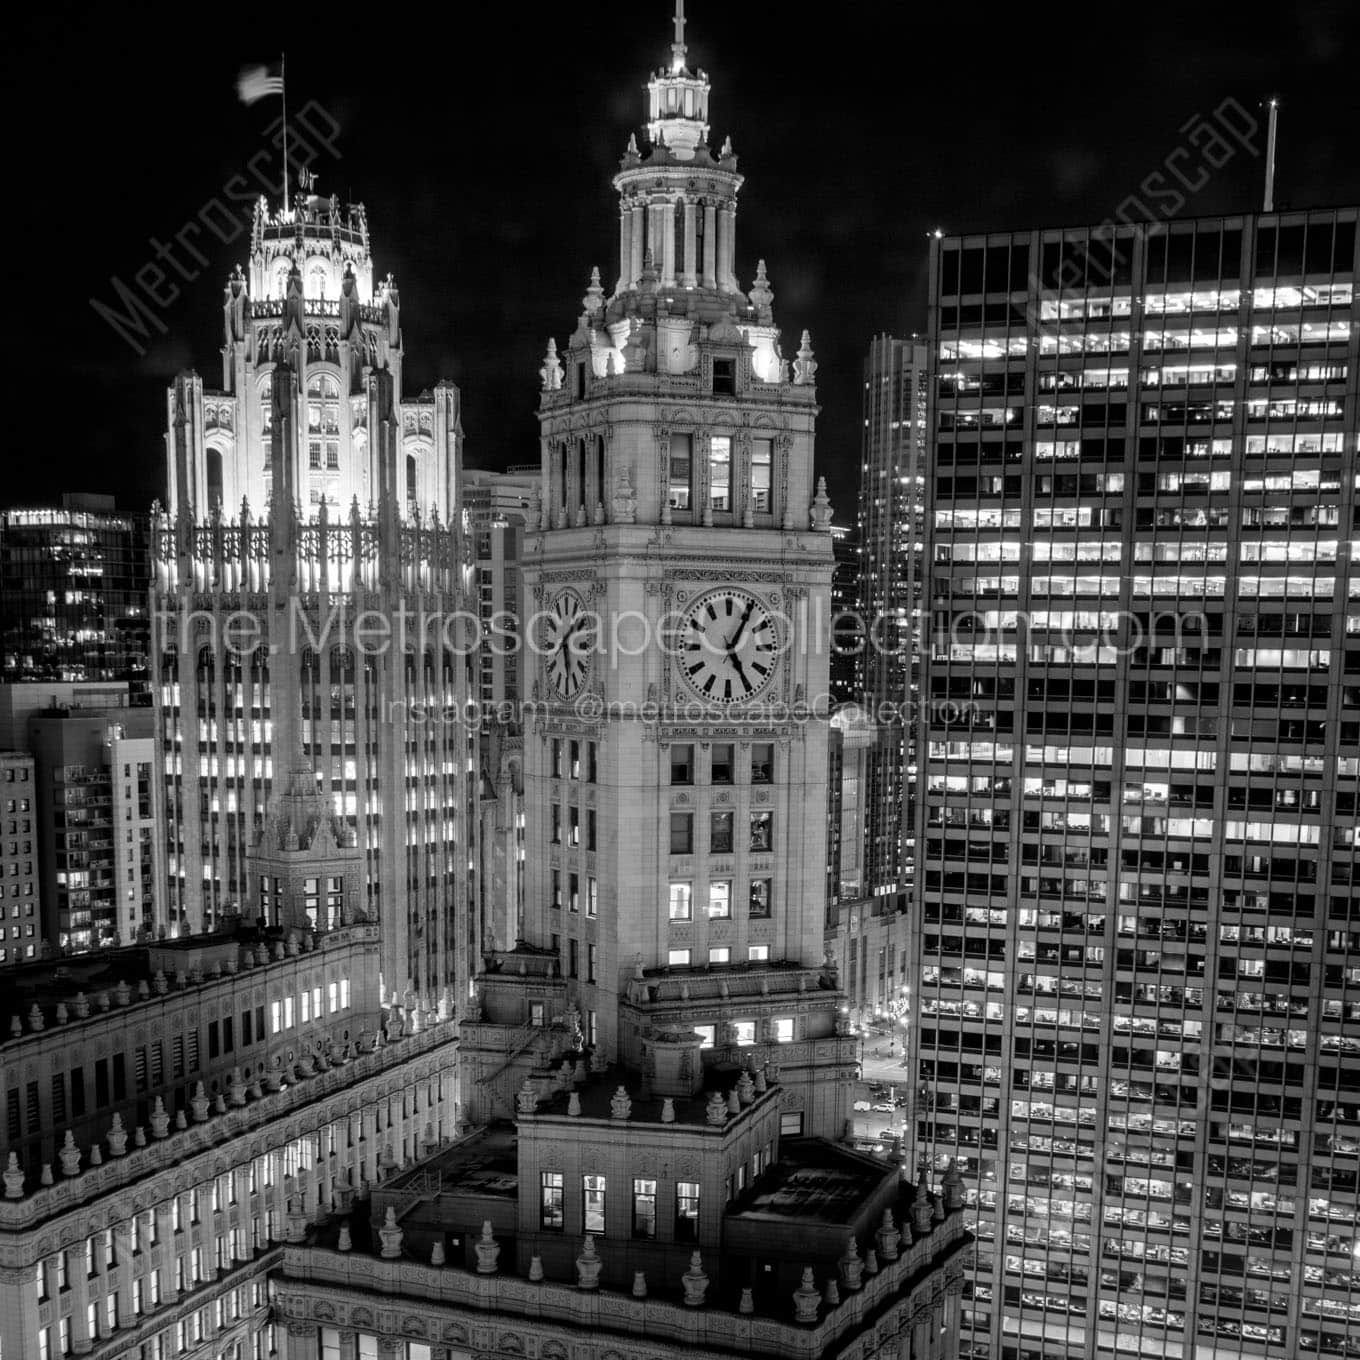 wrigley building clock face at night Black & White Office Art